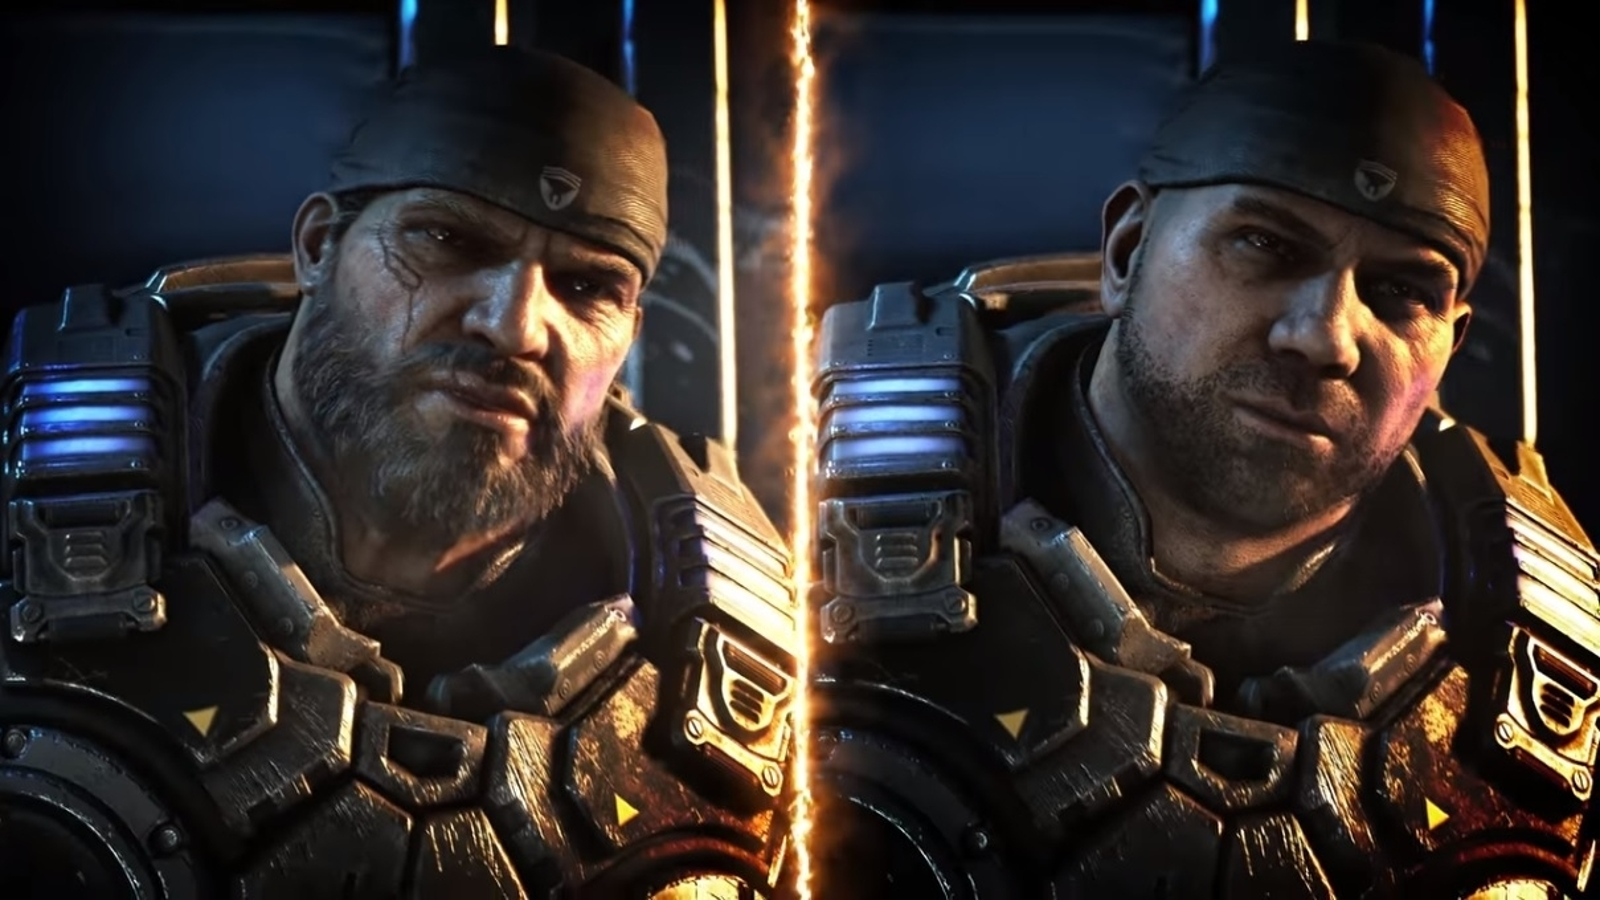 Gears 5 Hivebusters Story DLC Coming in Early December, Says Dev